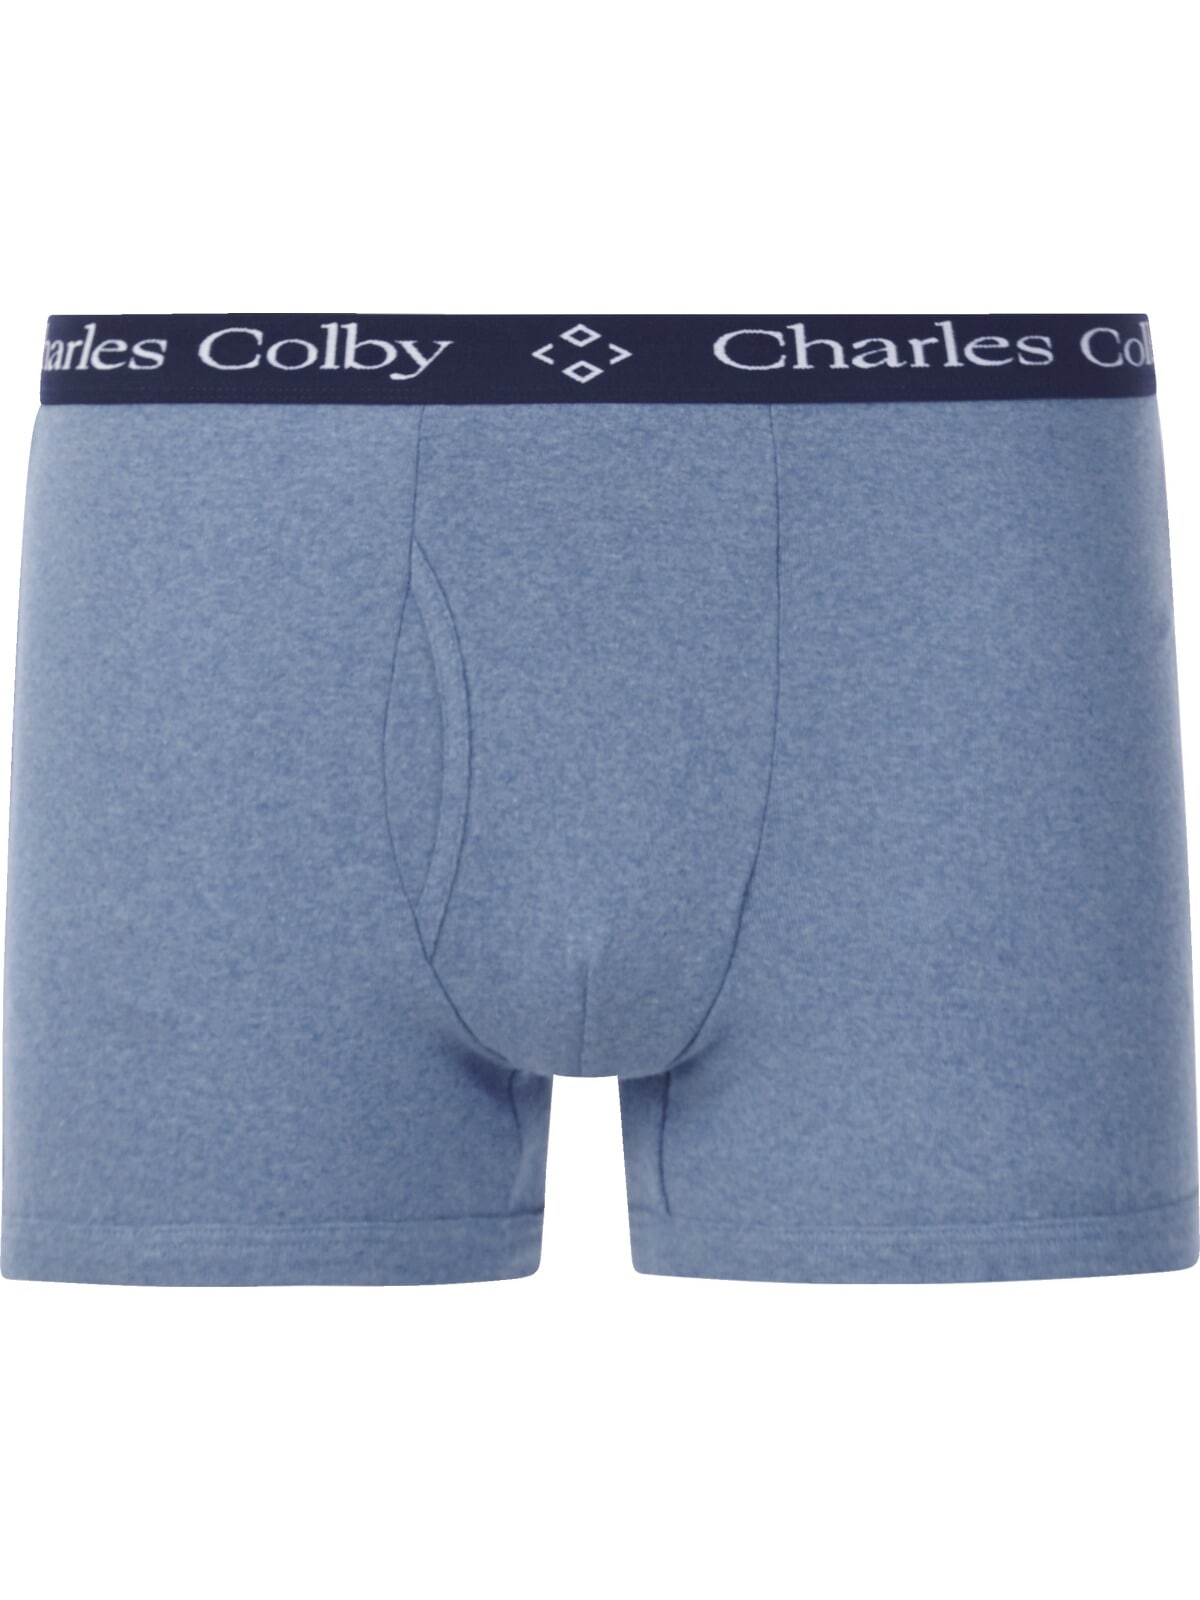 Charles Colby Retro Pants »2er Pack Retropant LORD TROYS«, (2 St.), in zwei Farbvarianten